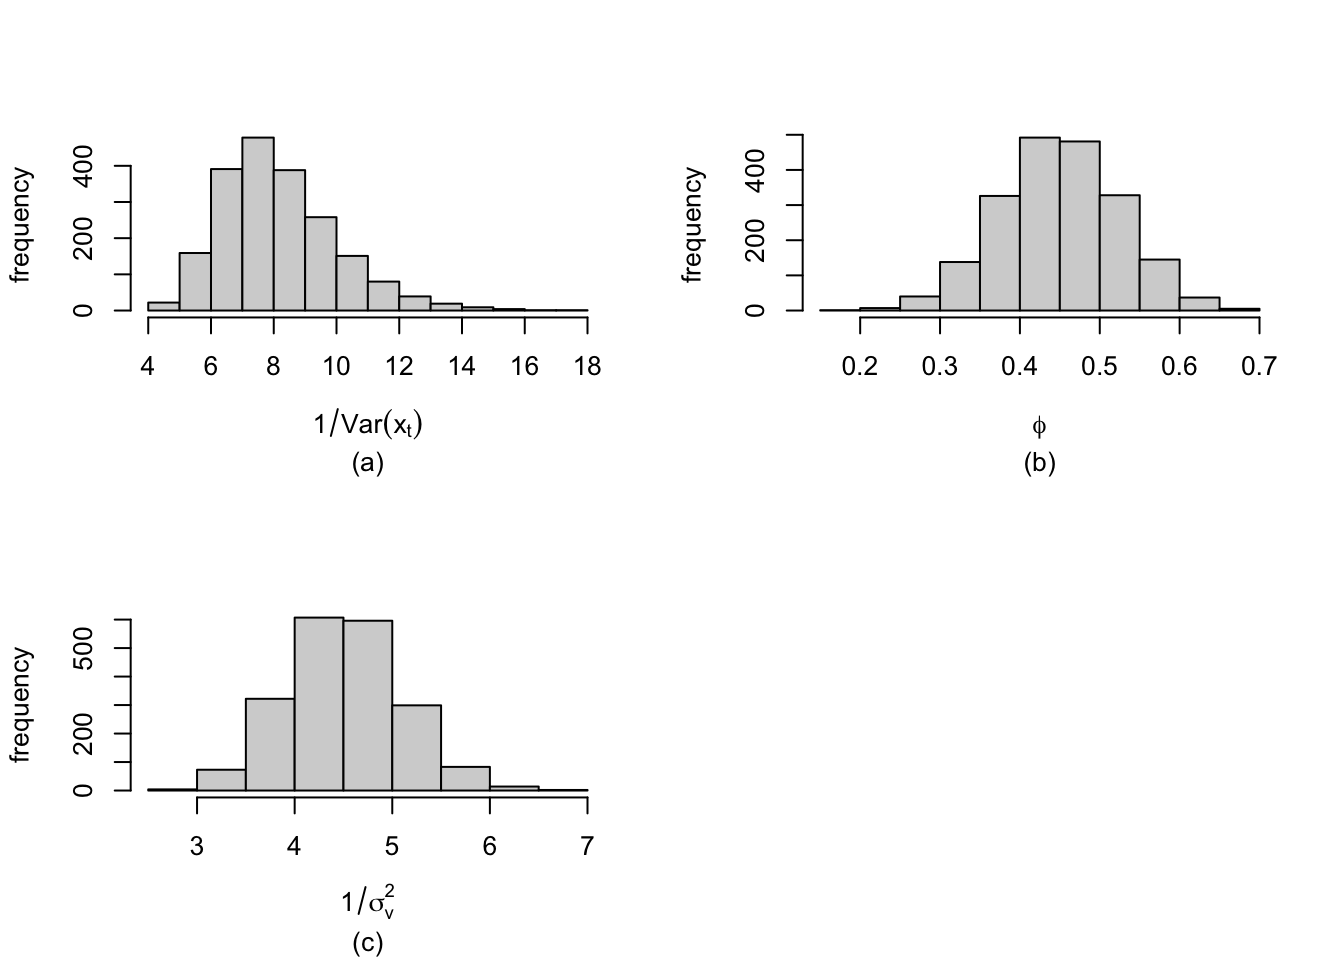 Histograms of samples of hyperparameters generated using the function inla.hyperpar.samples in the AR(1) with level plus noise model. Precision of state variable in (a), $\phi$ in (b), and precision of the observation error in (c).